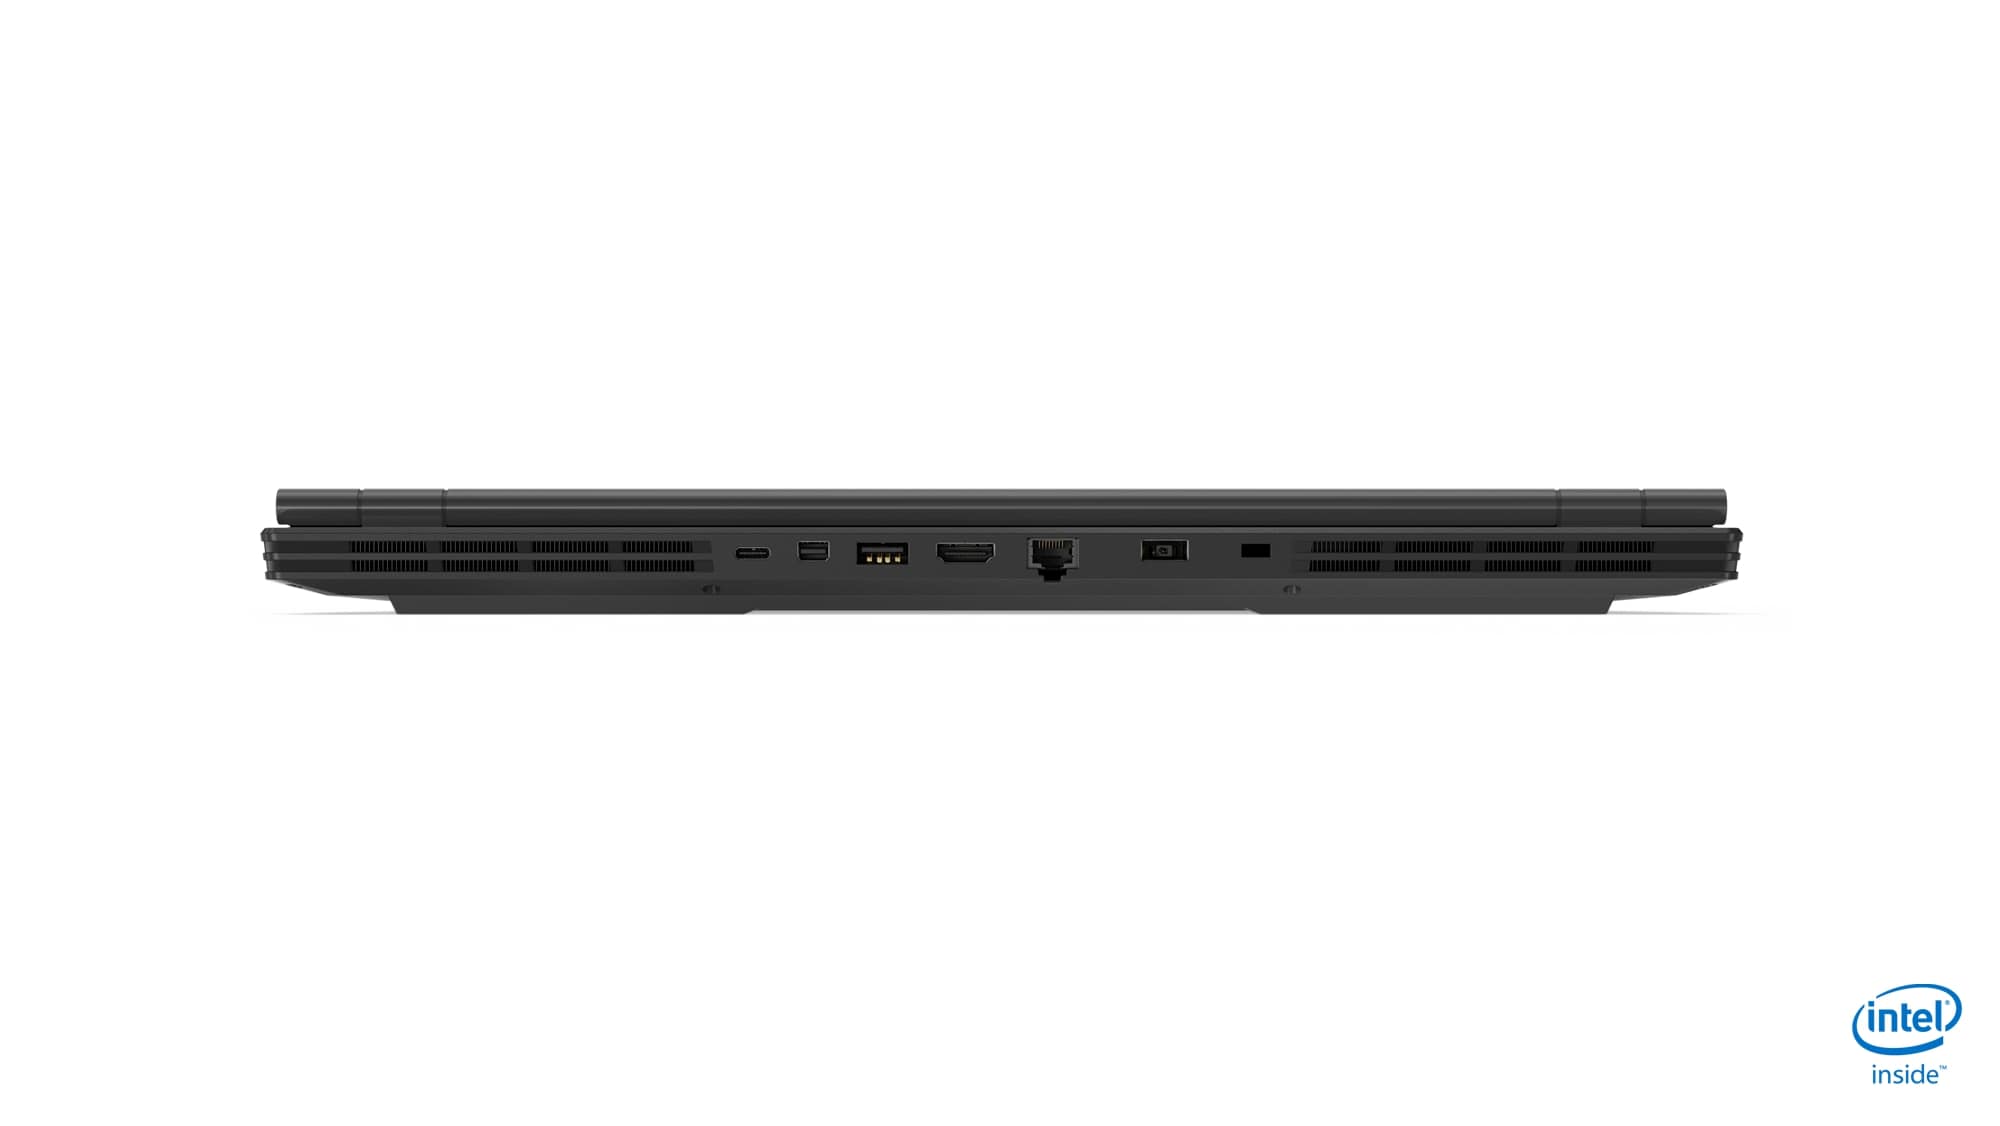 lenovo new legion gaming laptops ces 2019 15 y540 product photography 15inch tour rear forward facing